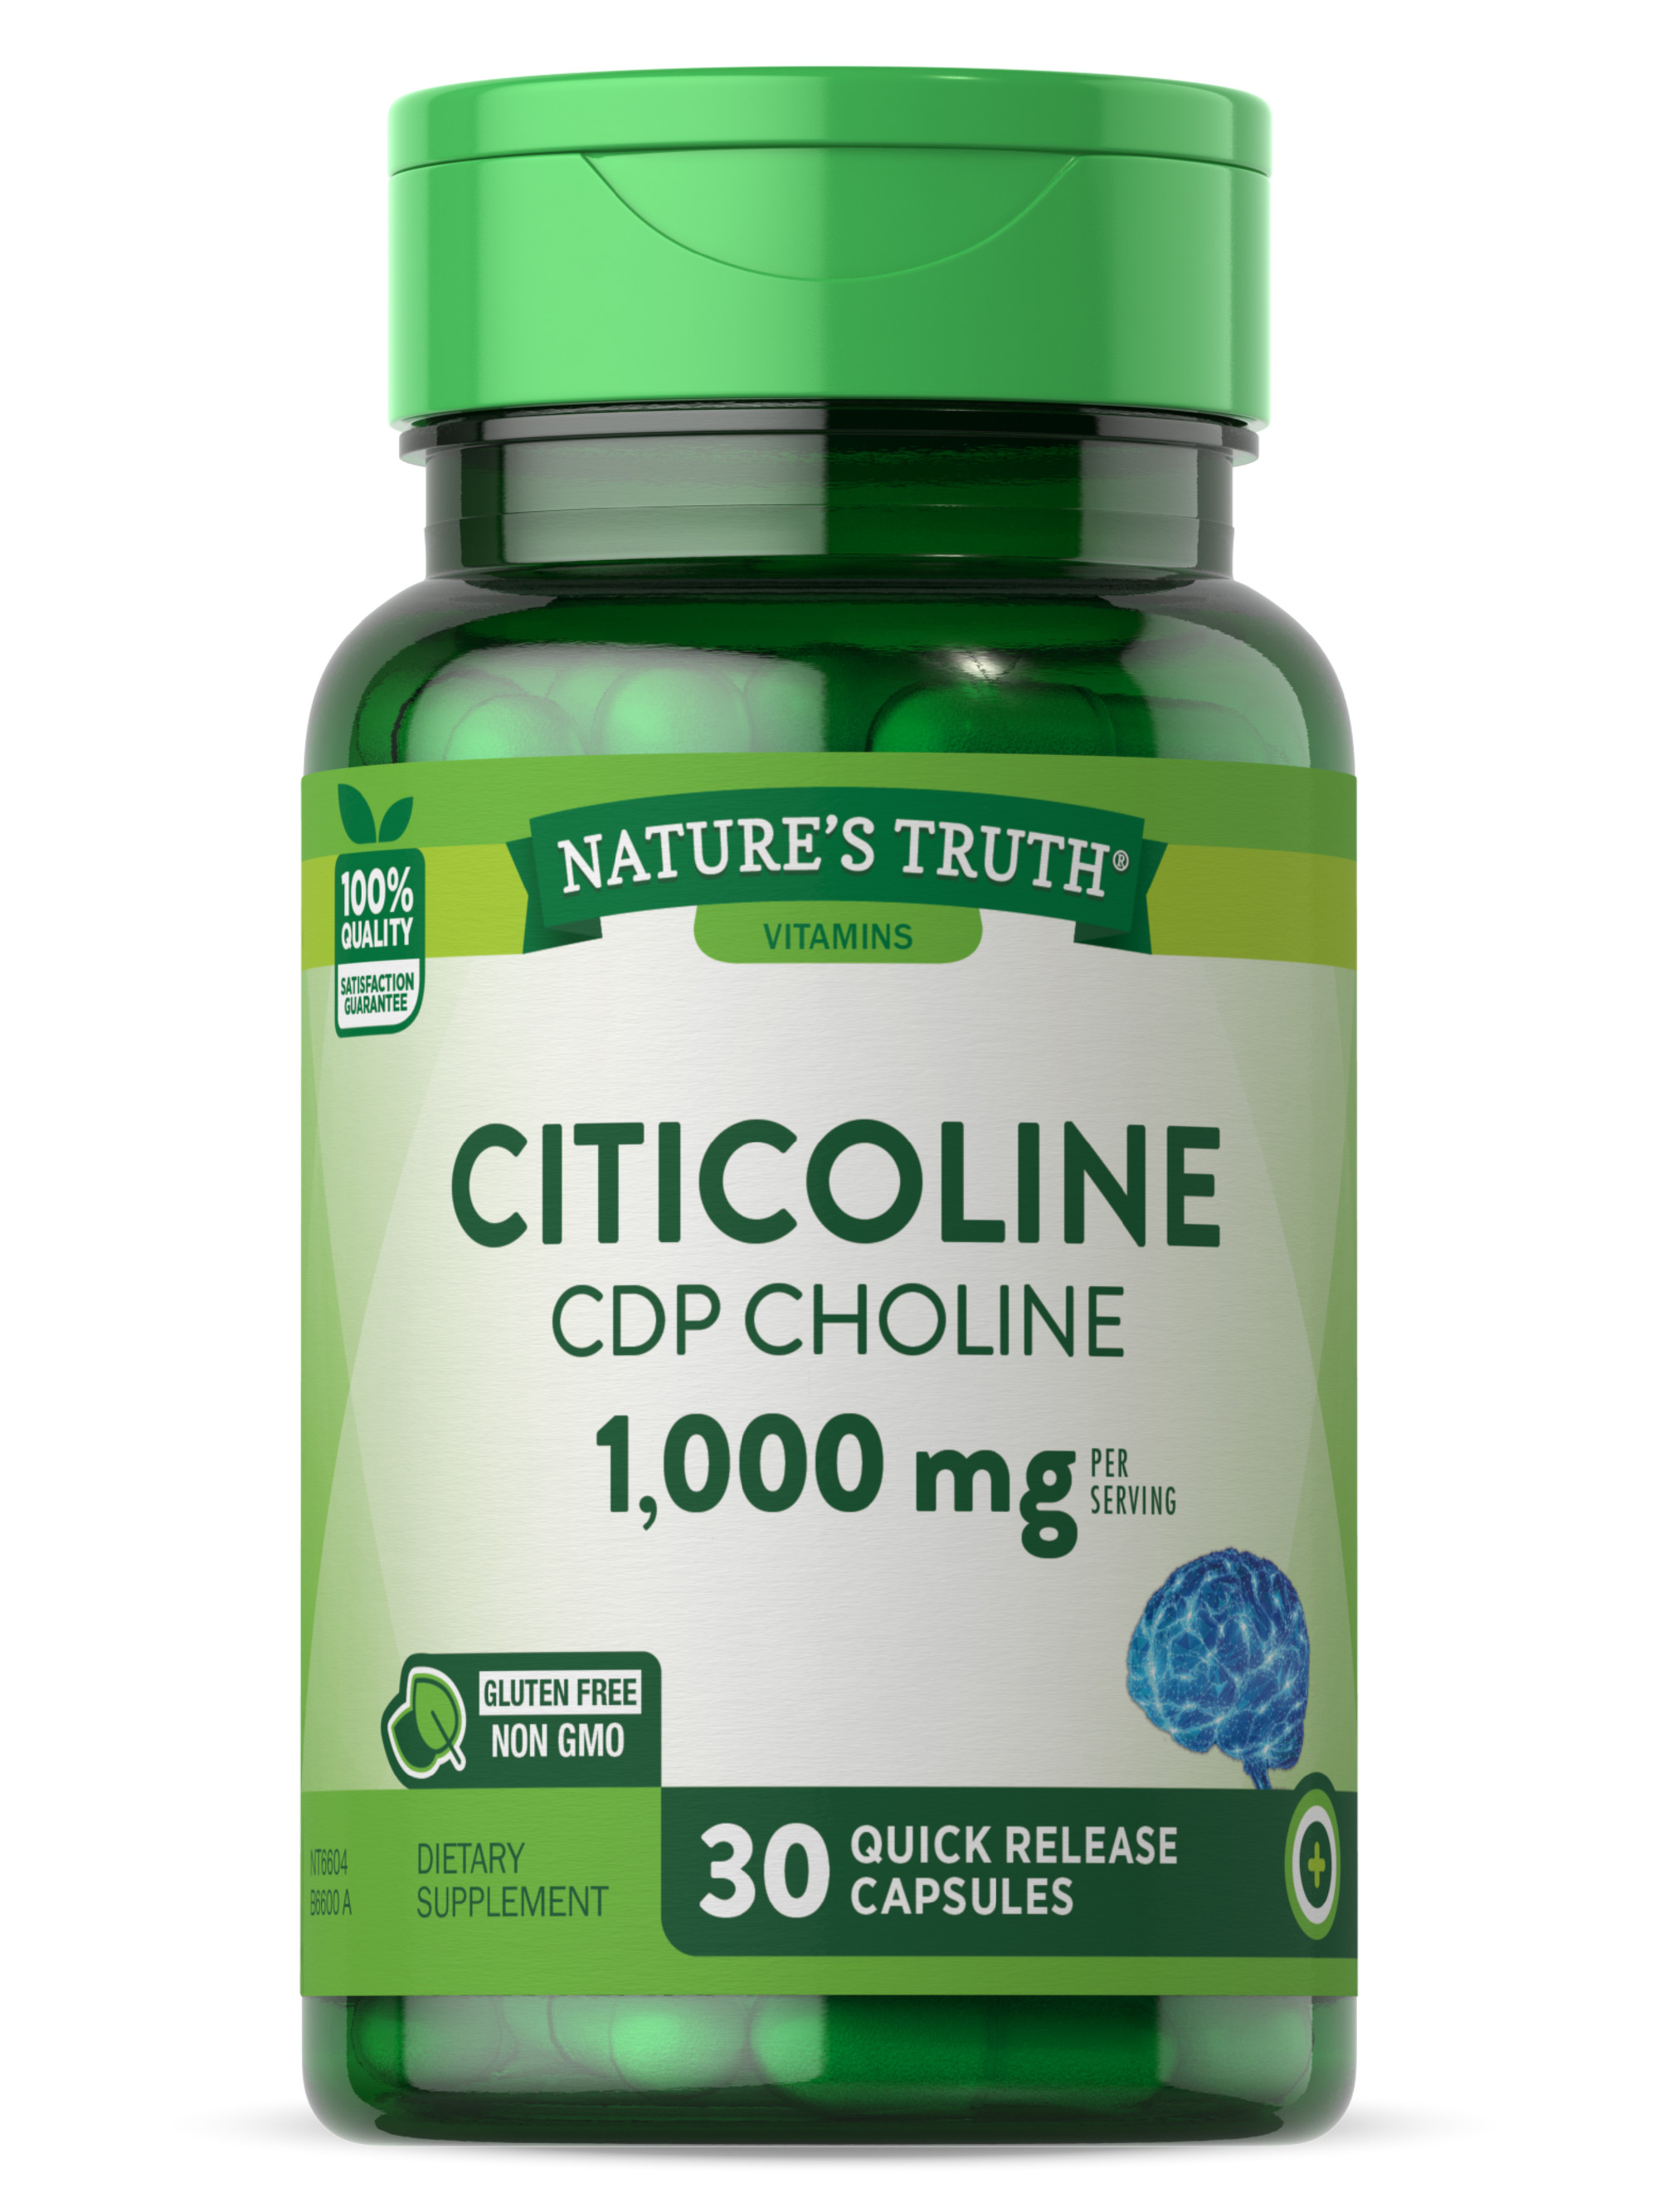 Citicoline 1000mg | 30 Capsules | CDP Choline | Non-GMO & Gluten Free Supplement | by Nature's Truth - image 1 of 6